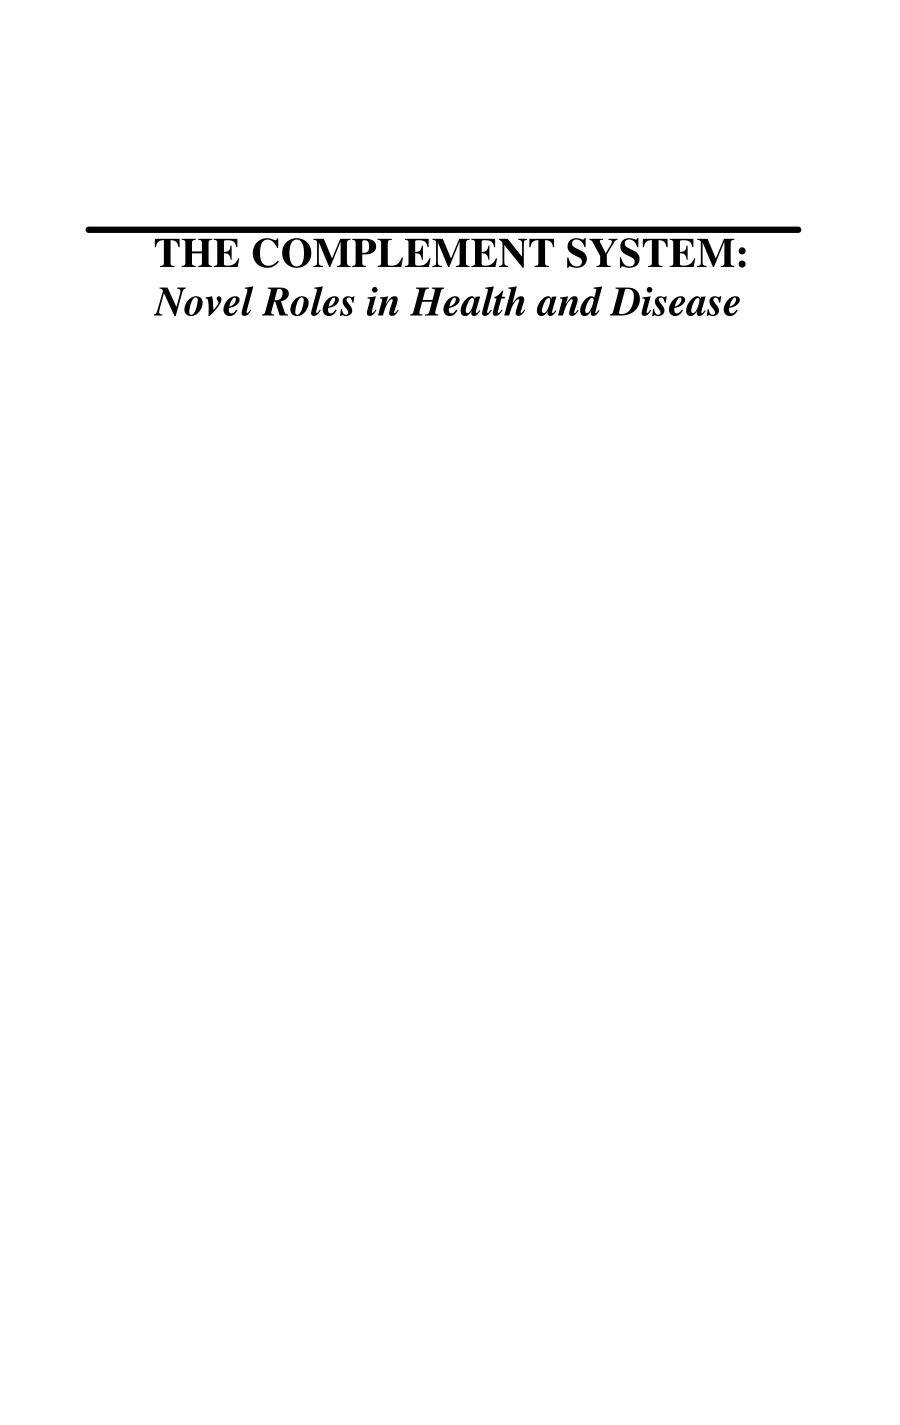 The complement system : novel roles in health and disease